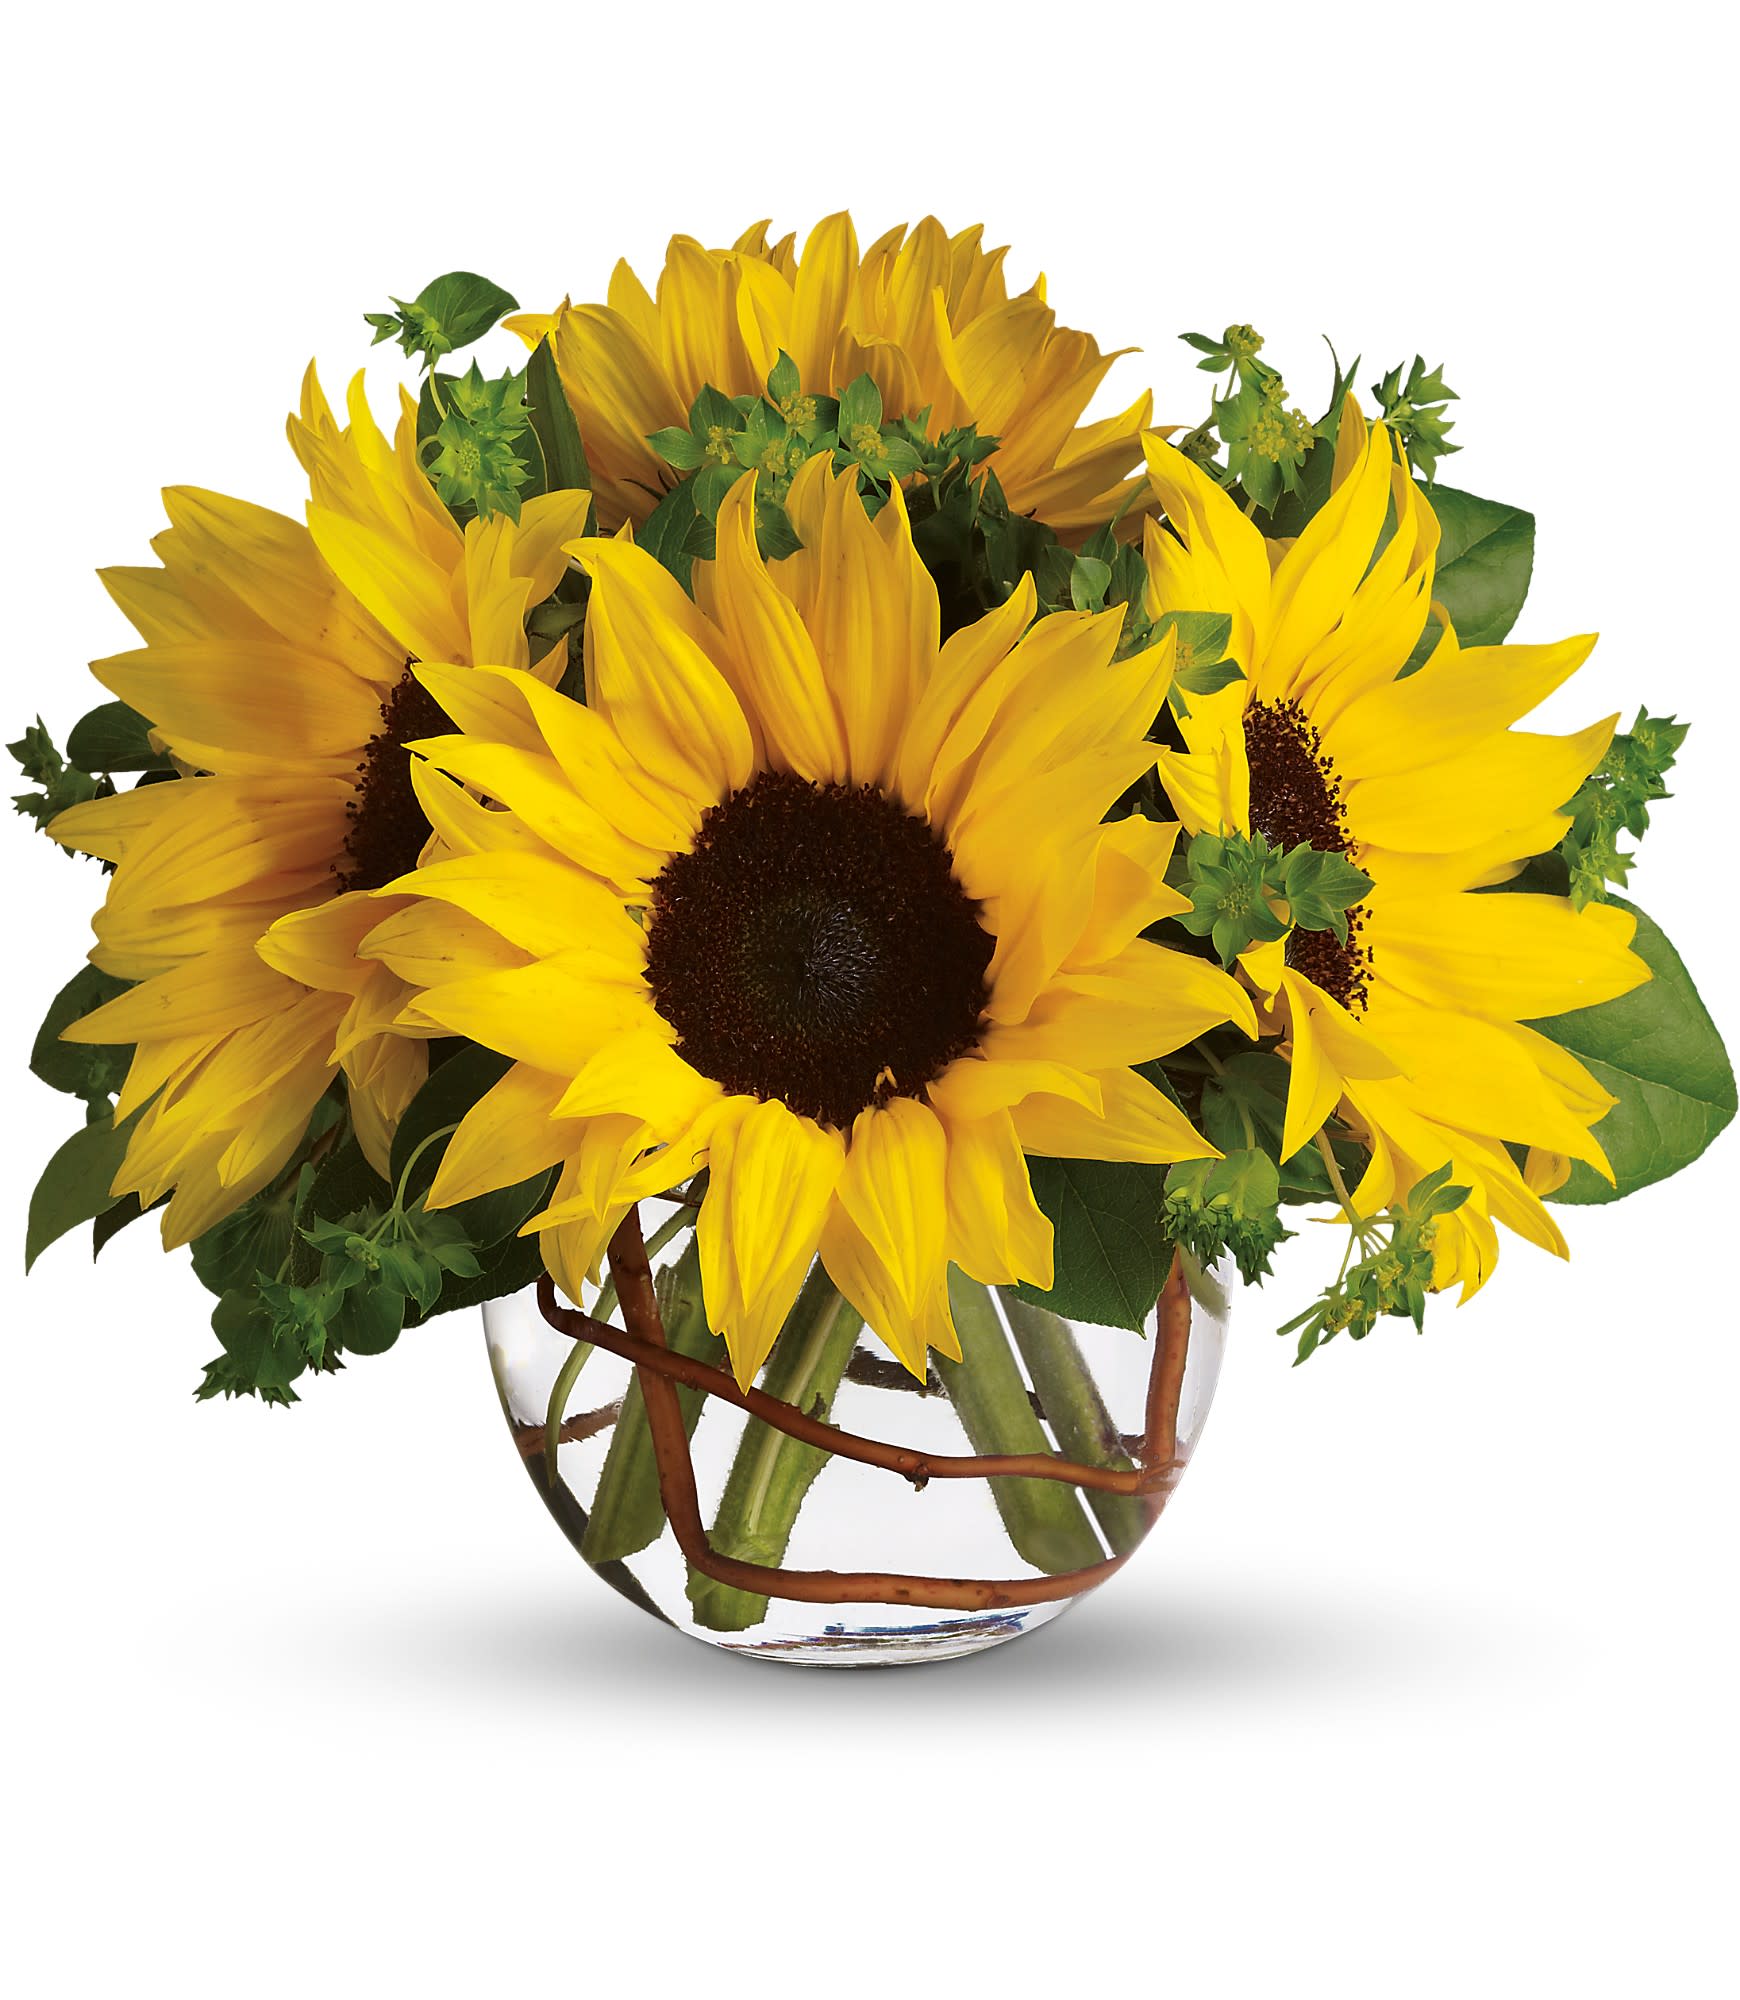 Sunny Sunflower by Teleflora - Whoever receives this stunning bouquet is sure to be bowled over by its bold beauty! It's big on fun and big on flowers.  